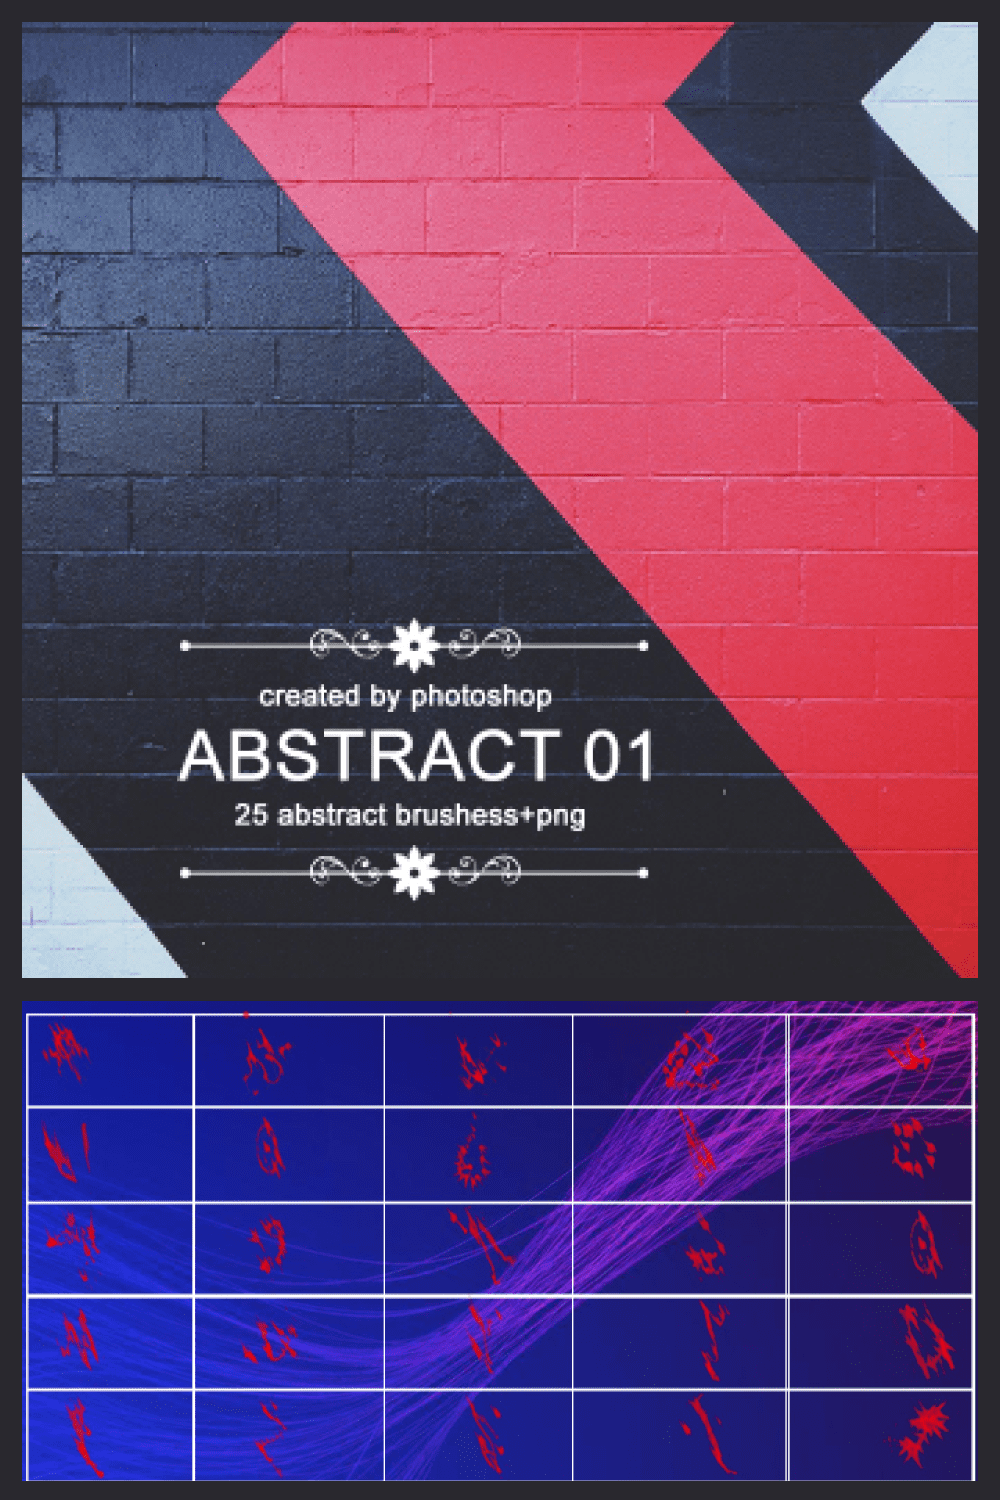 183 25 Abstract Photoshop Brushes